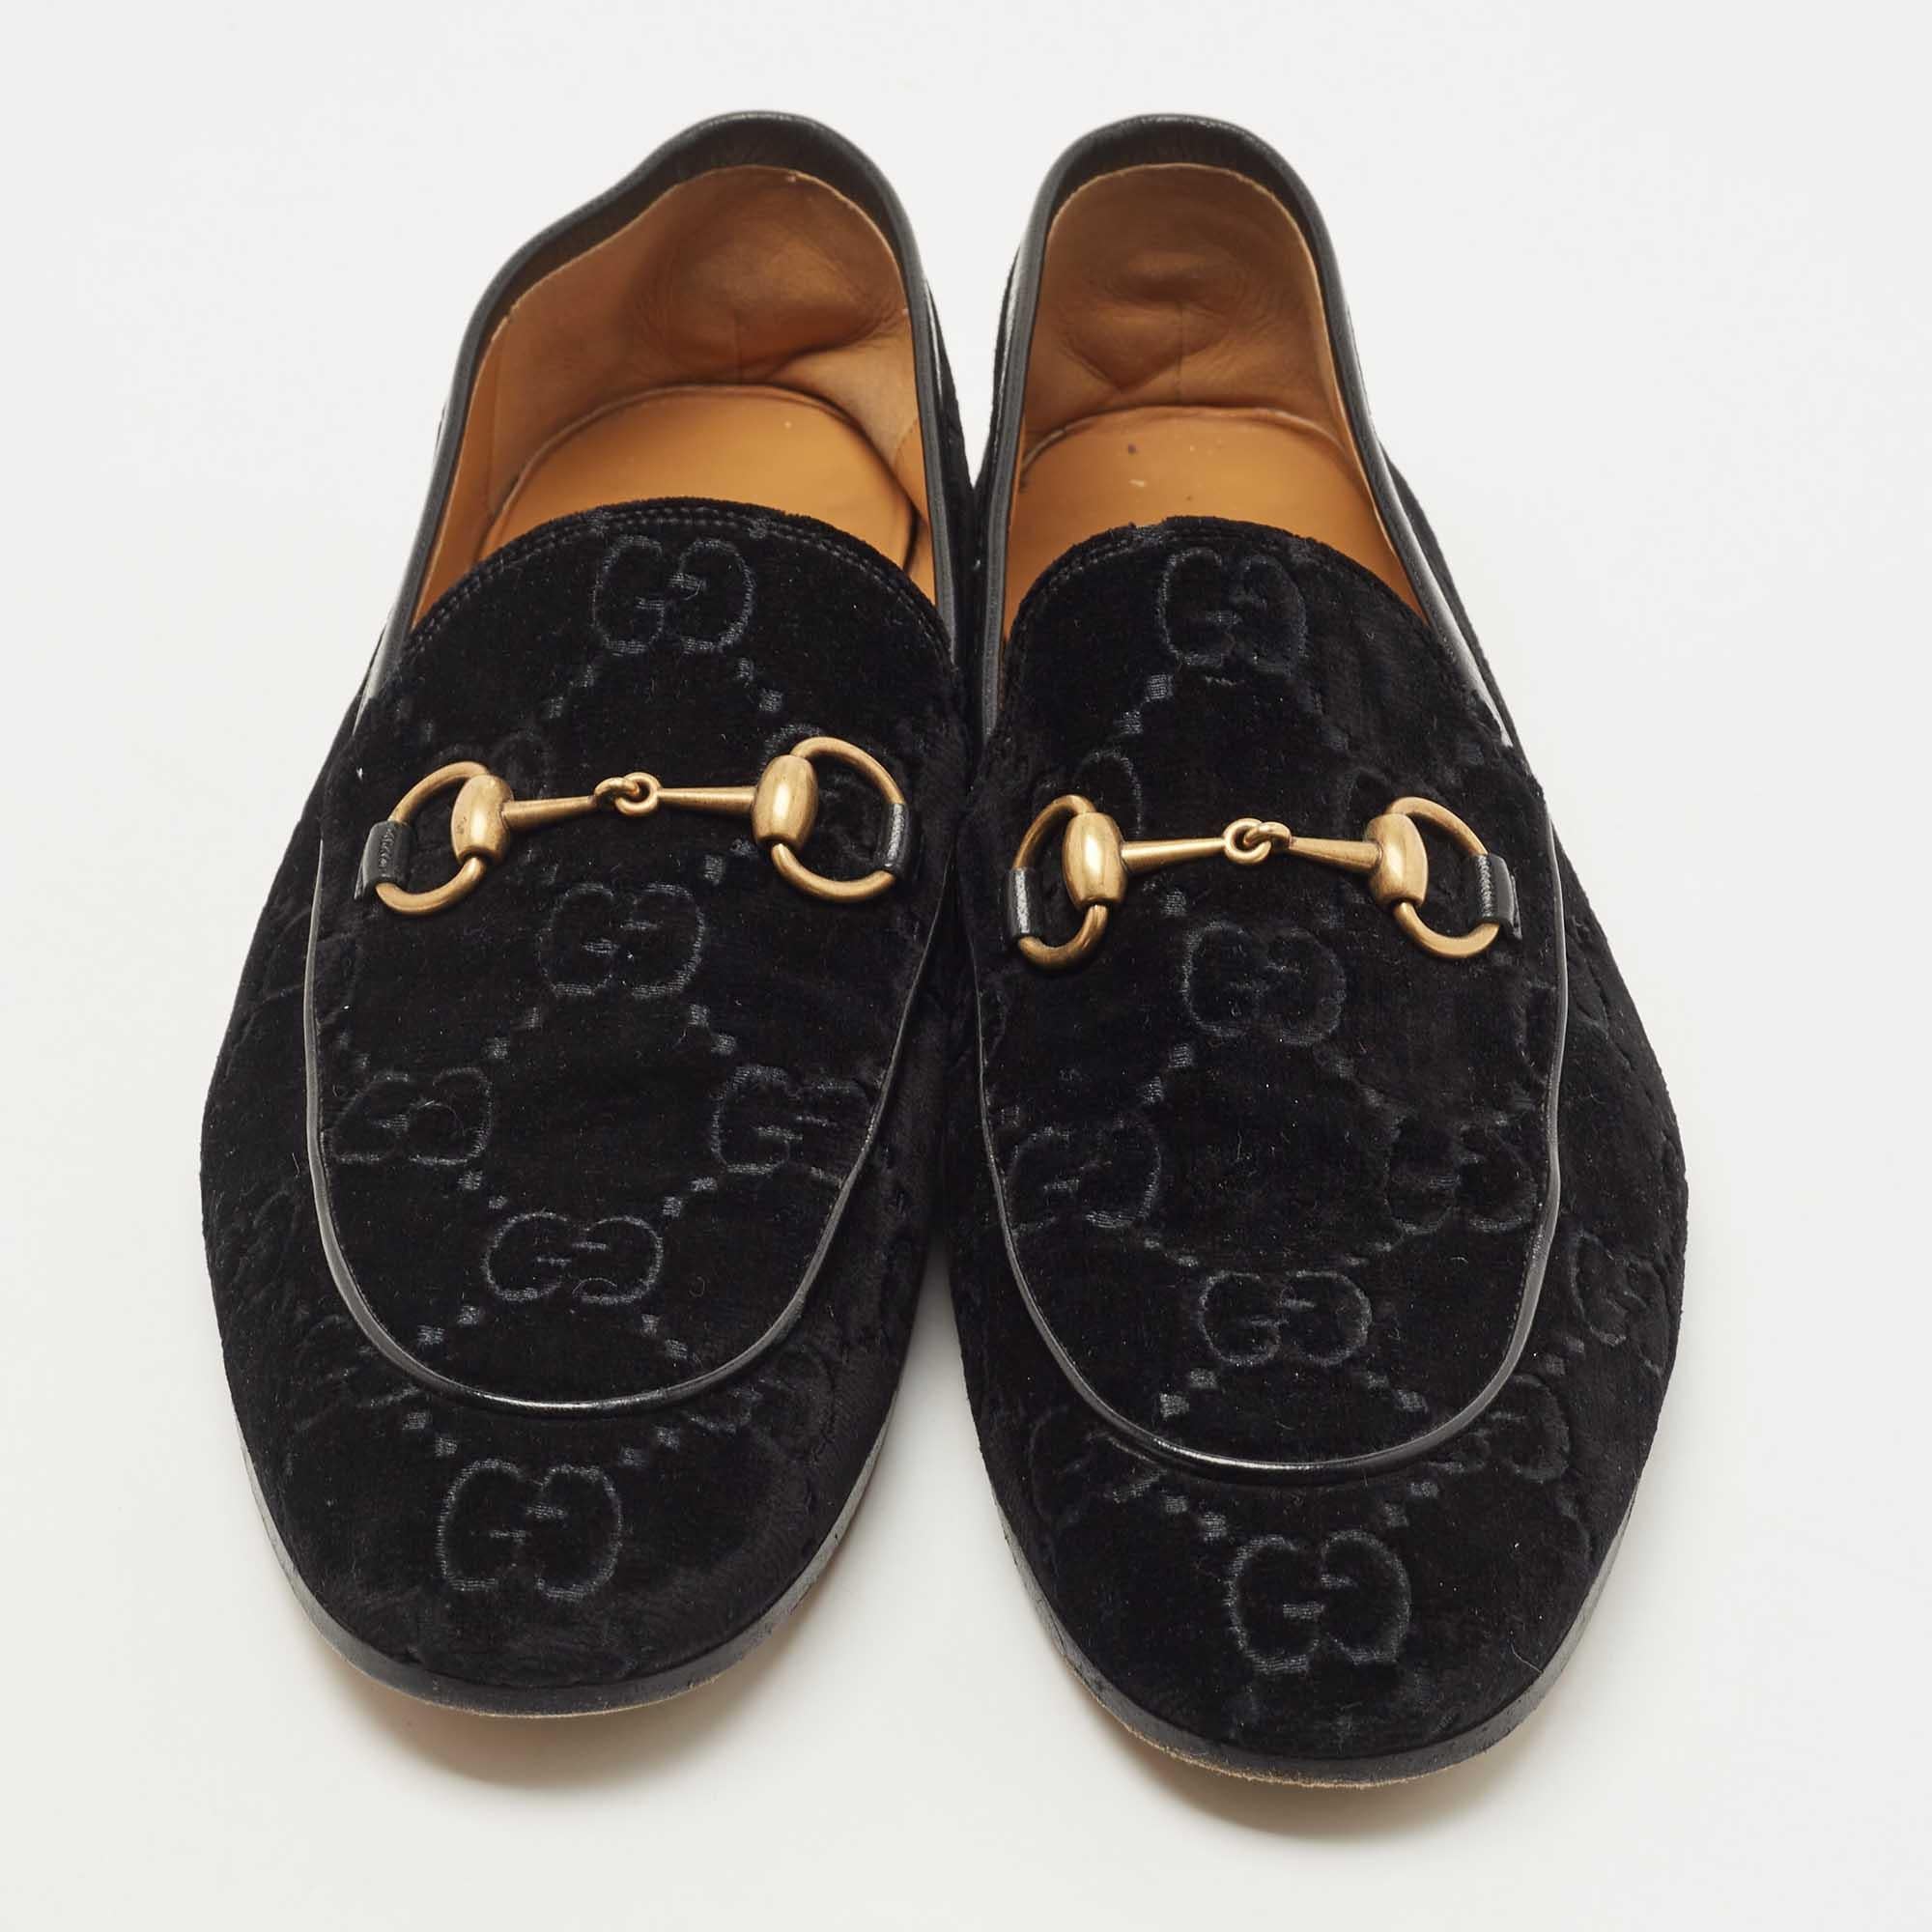 Practical, fashionable, and durable—these designer loafers are carefully built to be fine companions to your everyday style. They come made using the best materials to be a prized buy.

